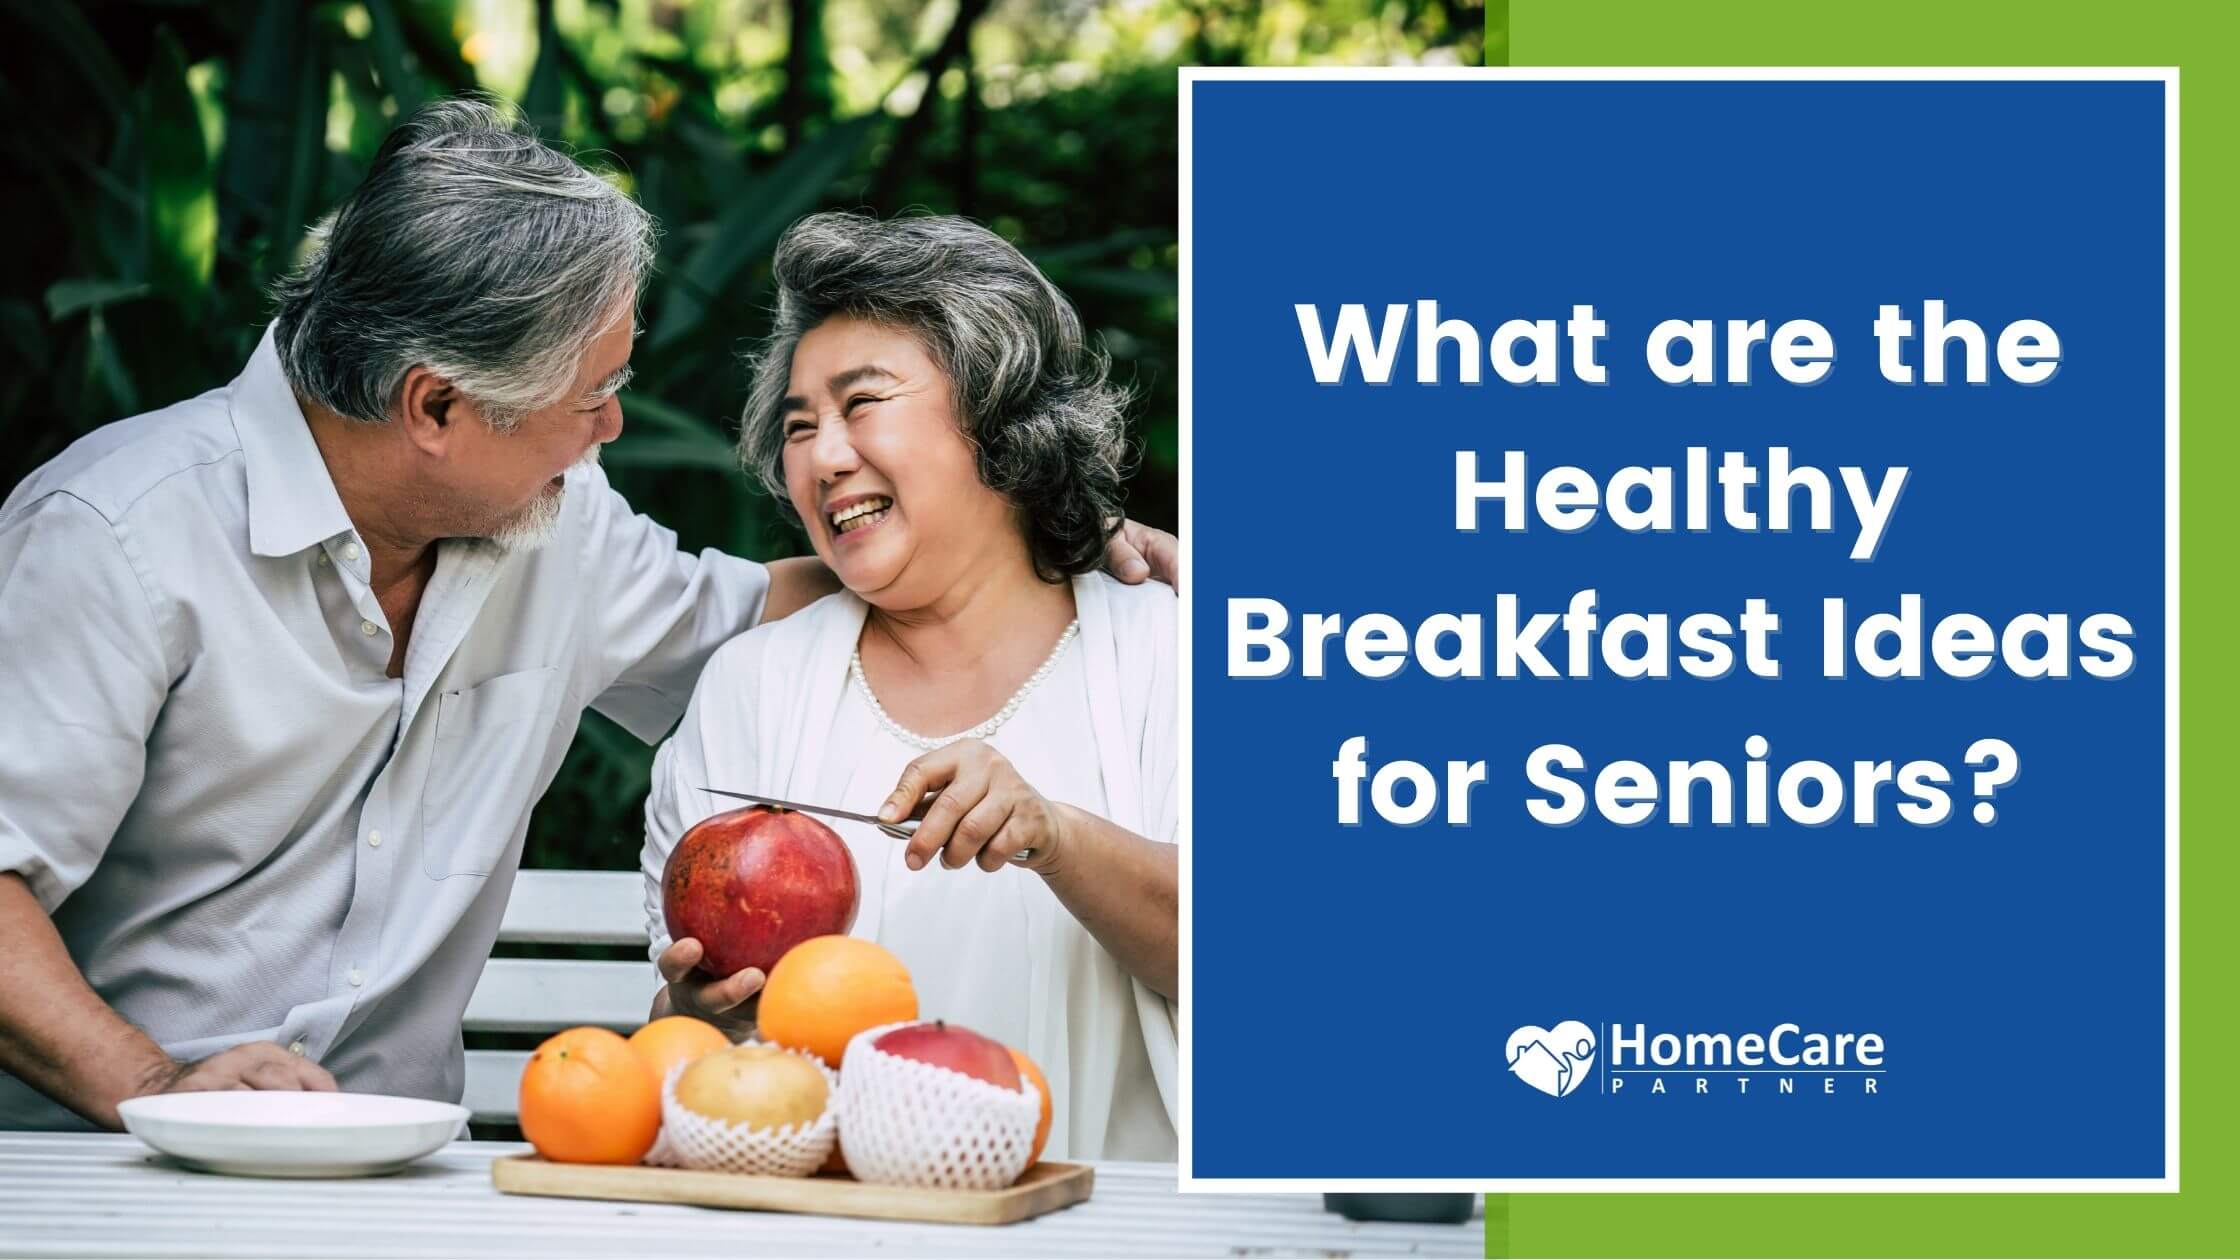 What are the Healthy Breakfast Ideas for Seniors?